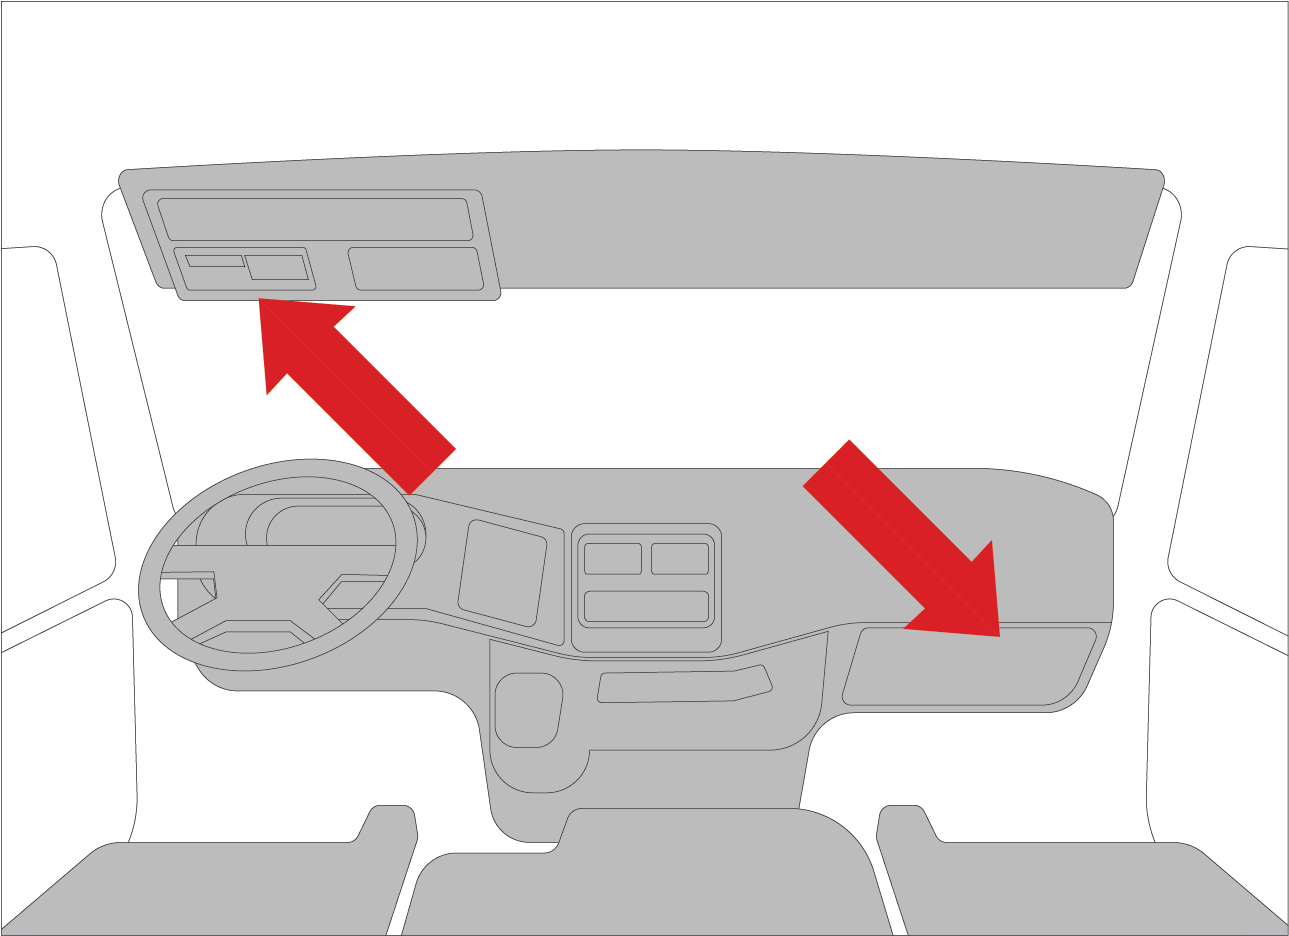 tachograph-fms-connector-location.png